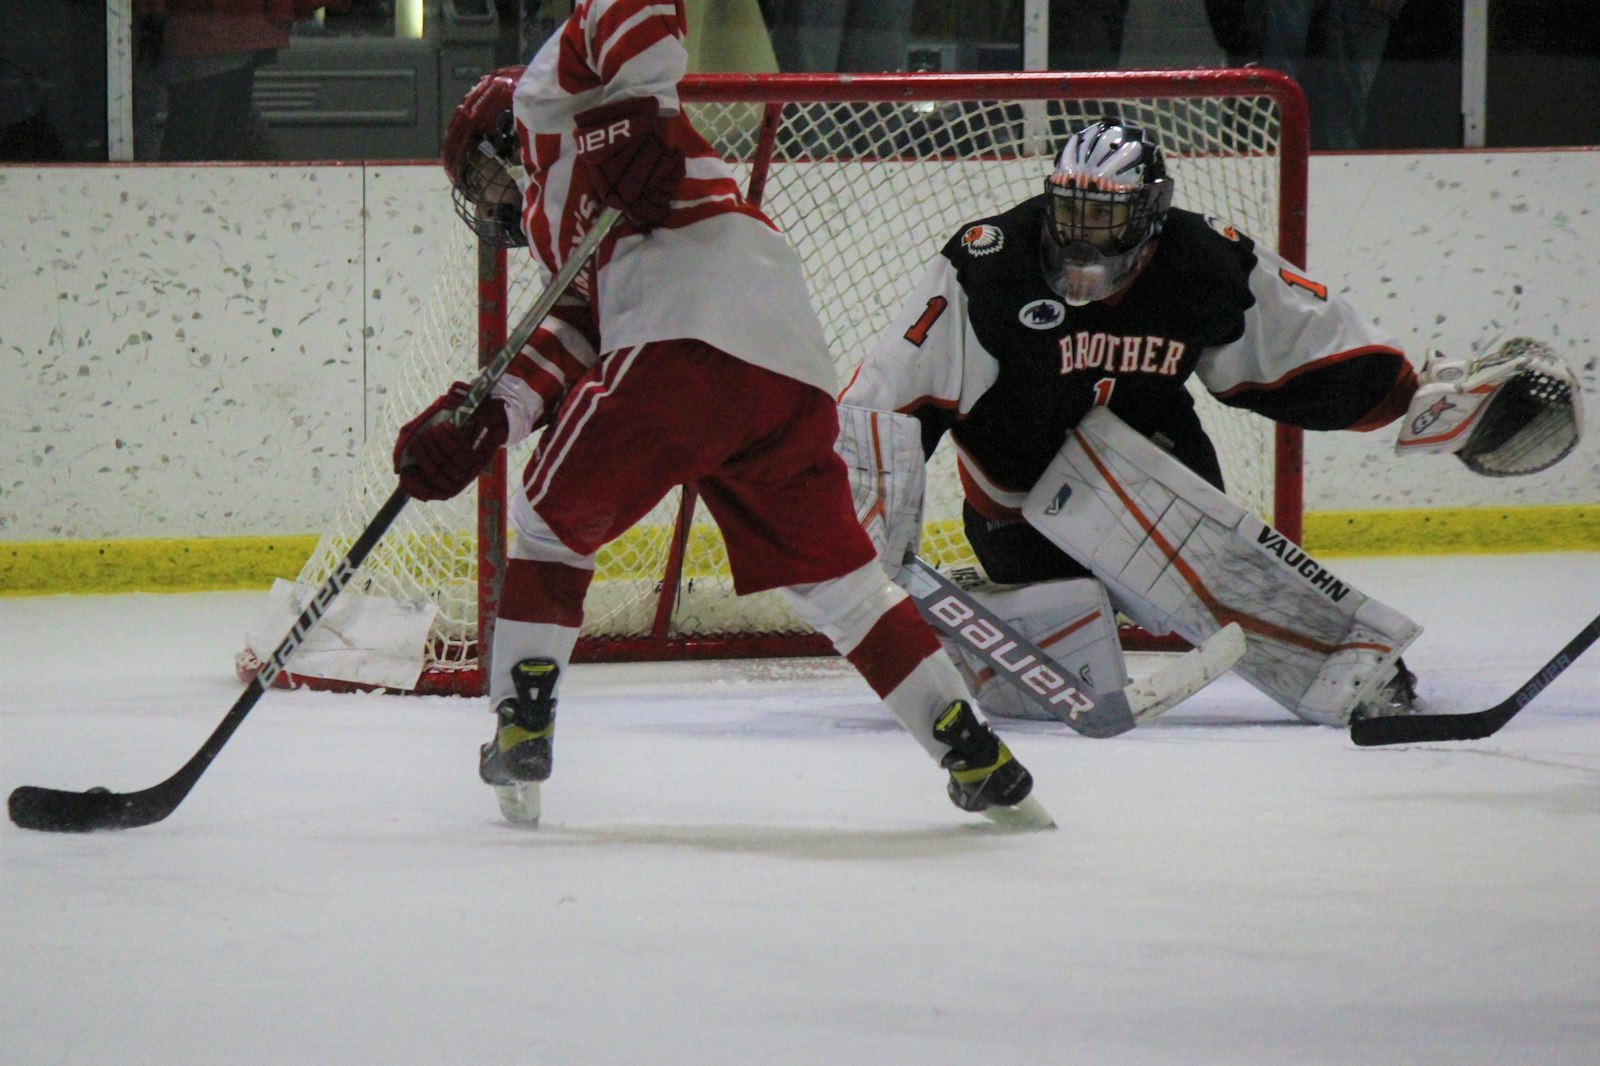 Brother Rice goaltender Tommy O’Donnell prepares to block a backhand shot by Jack Brunell in the third period of Orchard Lake St. Mary’s 2-0 win Jan. 11 at the St. Mary’s Athletic Complex.